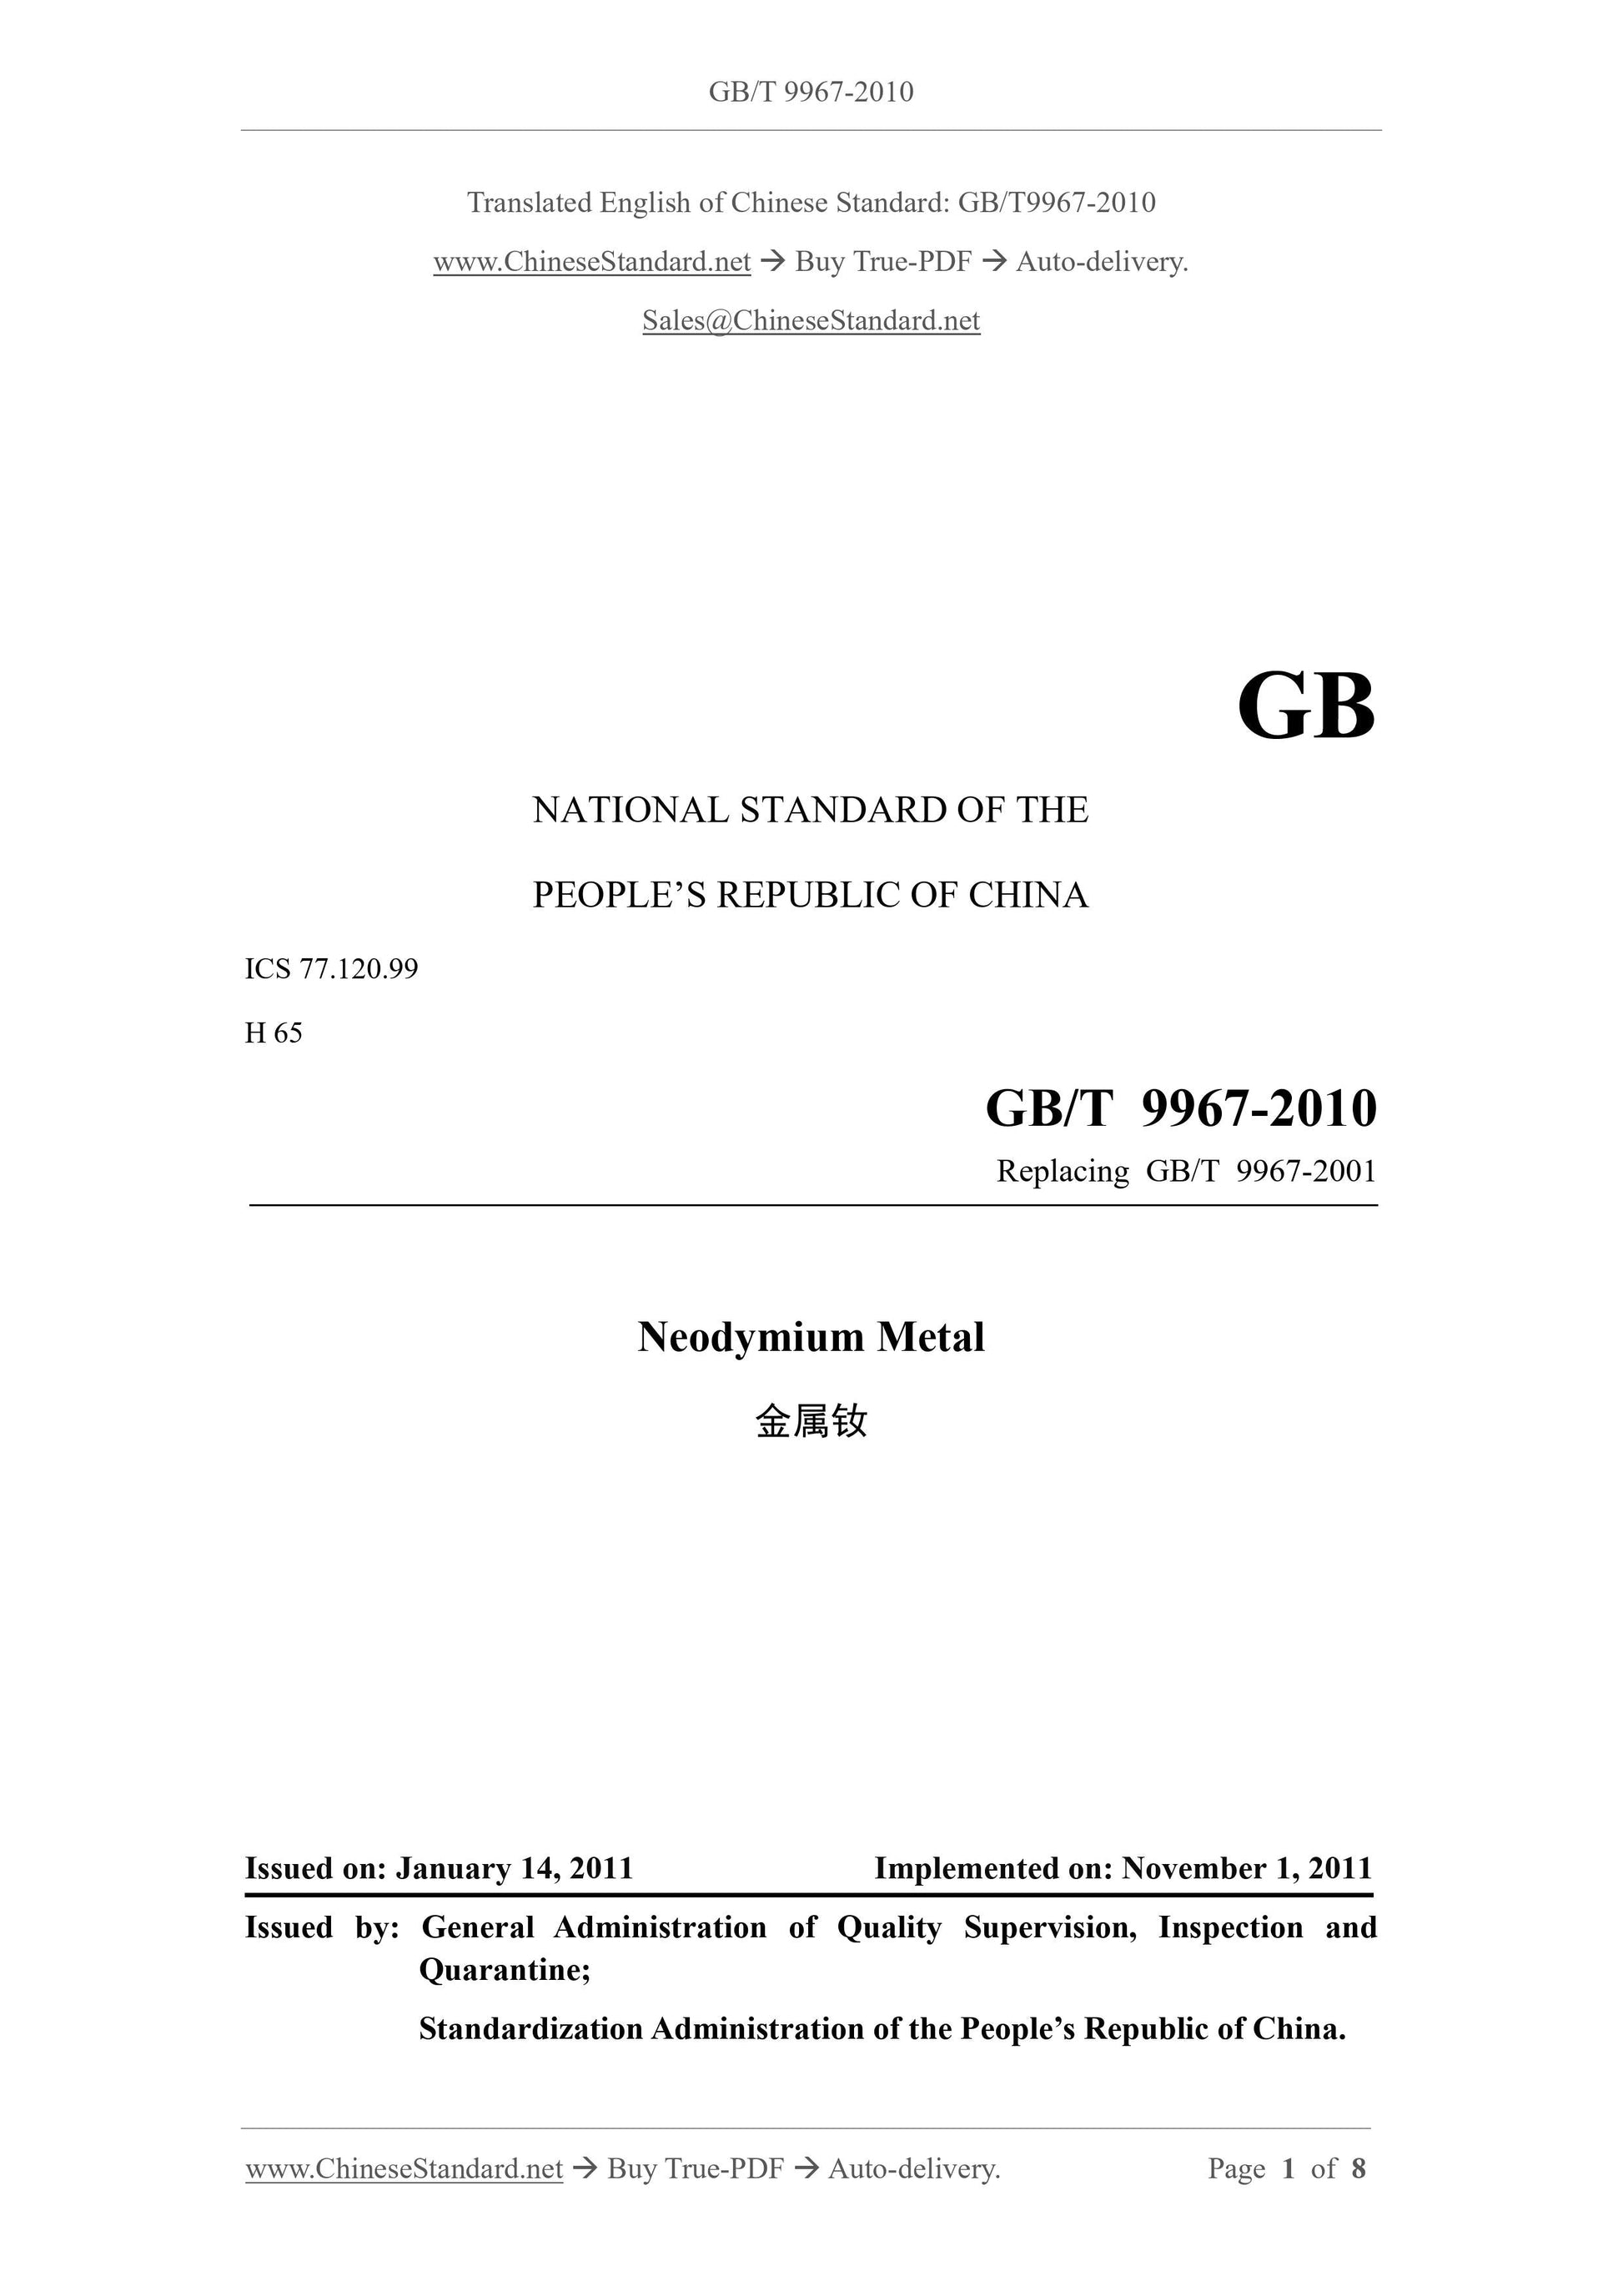 GB/T 9967-2010 Page 1